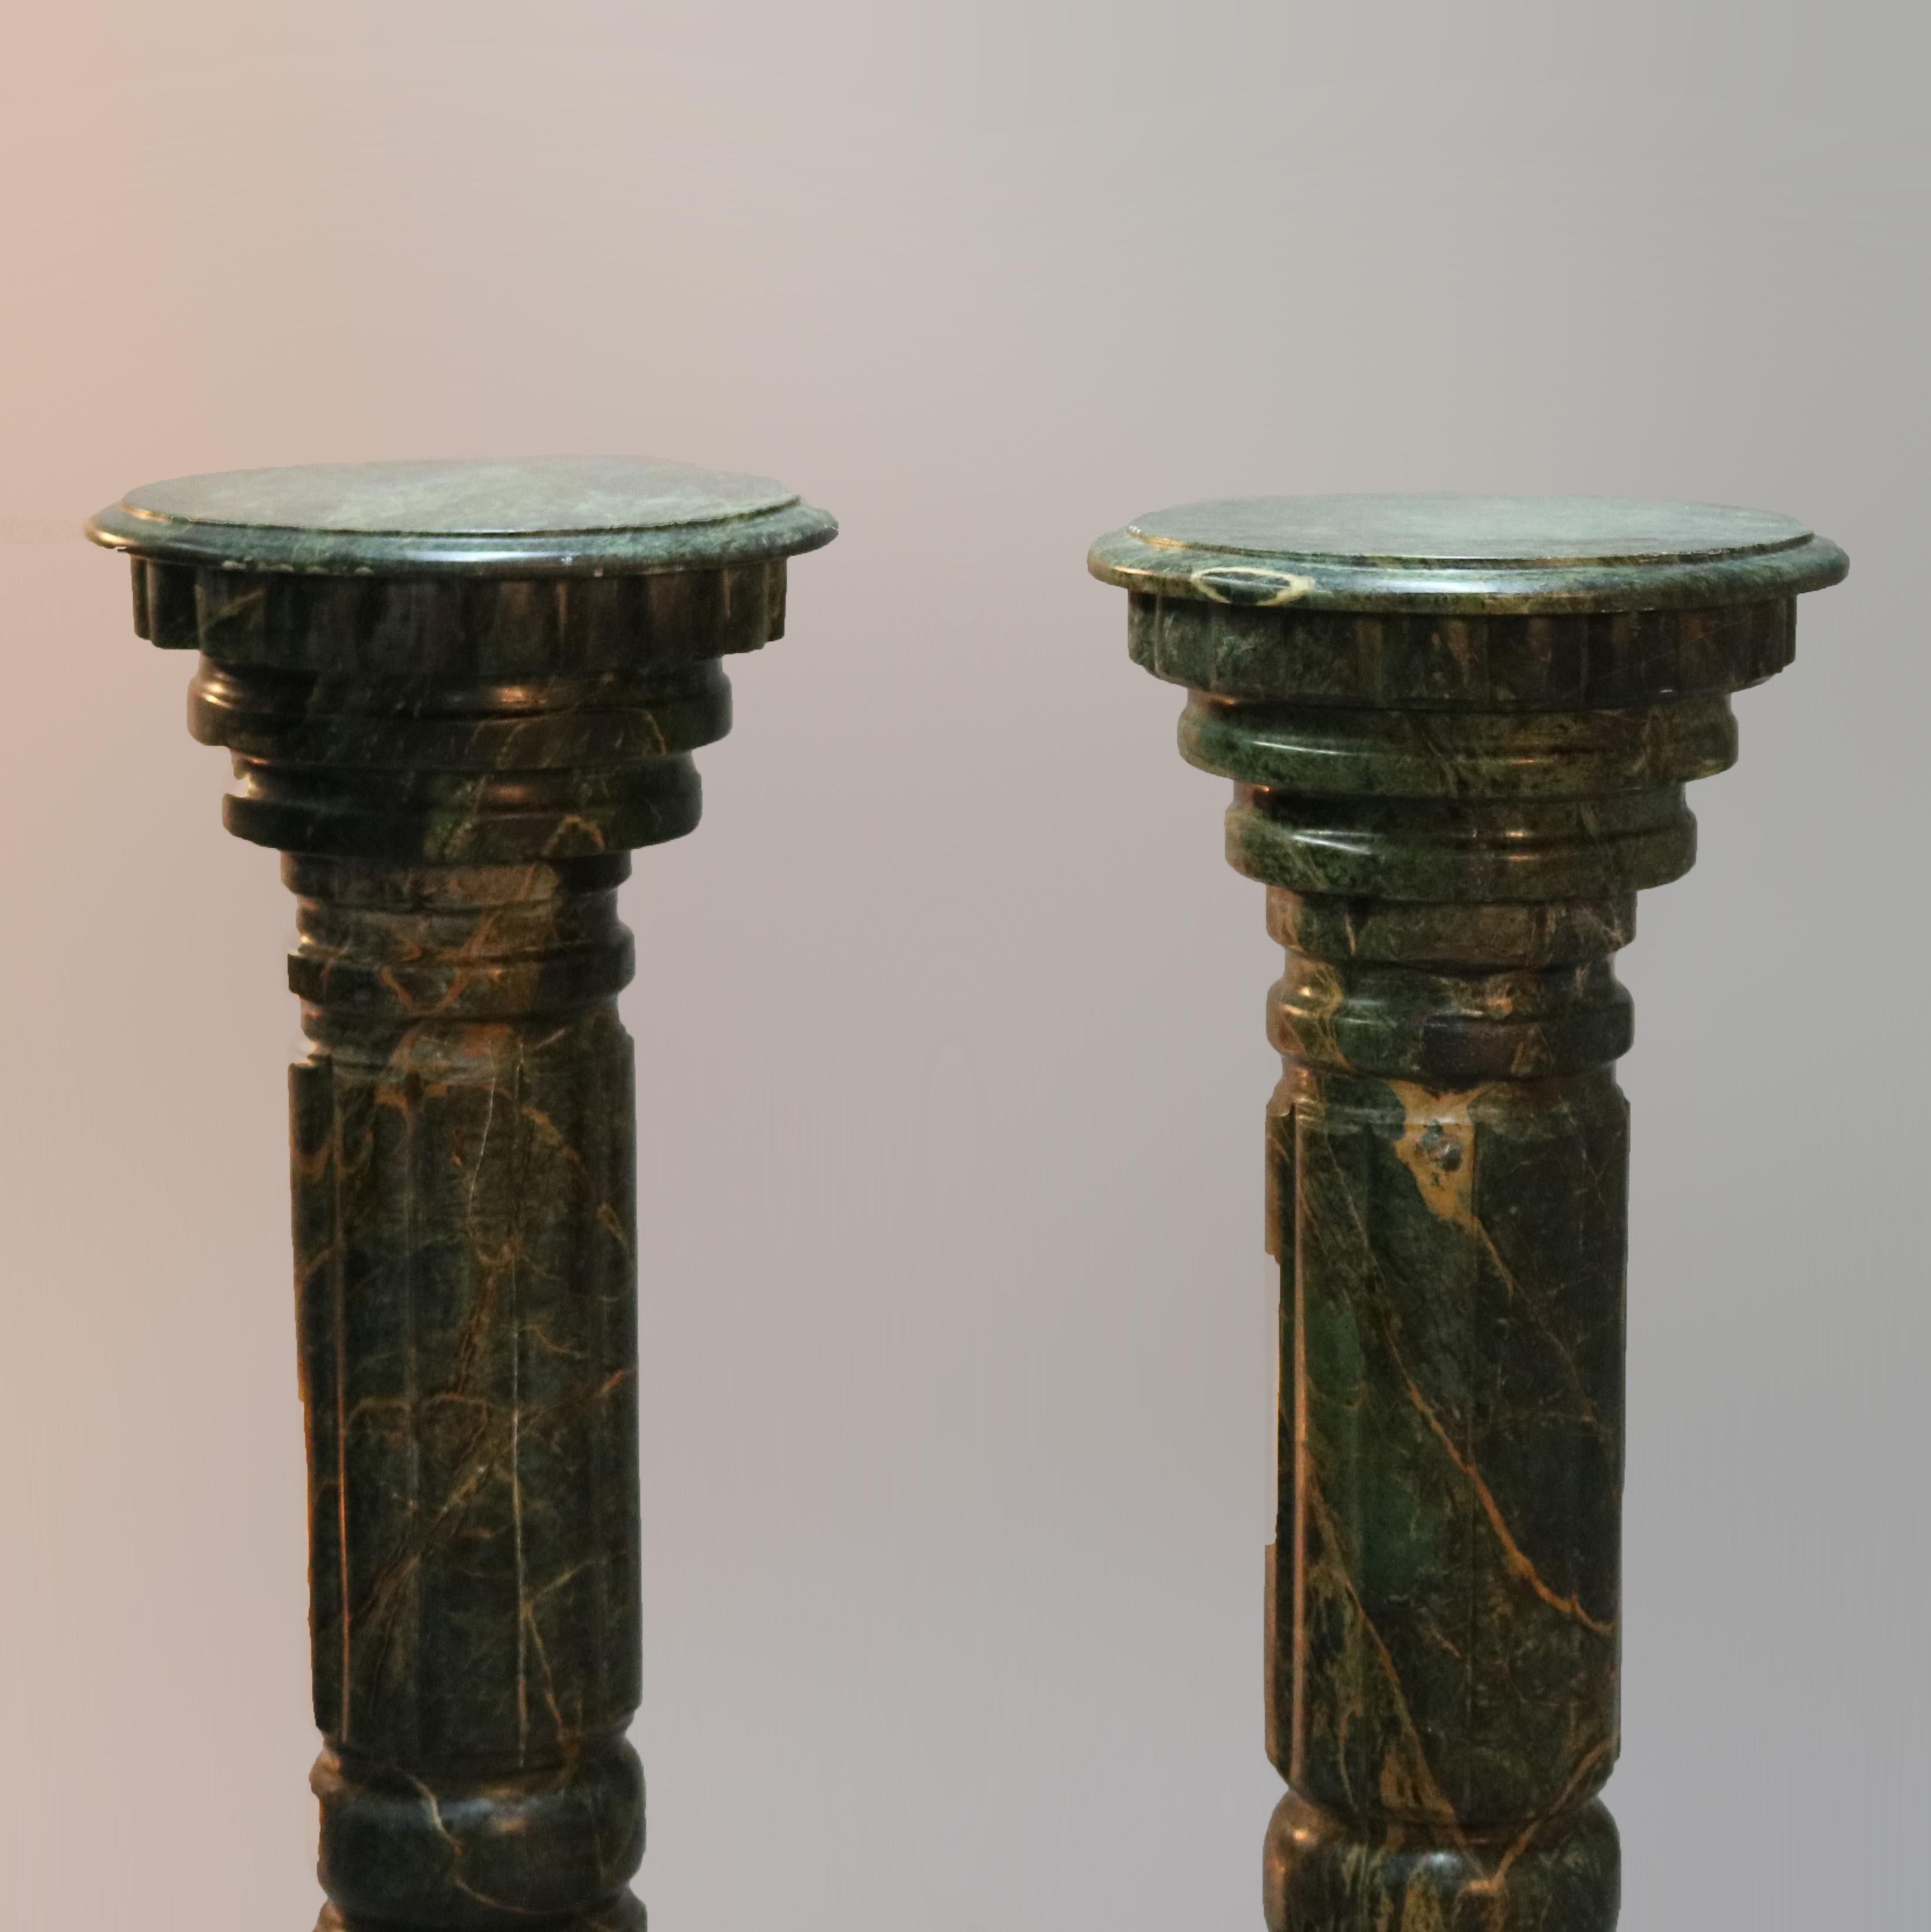 A matching pair of Italian deeply striated malachite green marble sculpture display pedestals offer classical Greek Doric form with circular display surmounting carved pedestal seated on stepped bases, 20th century

Measures: 41.75